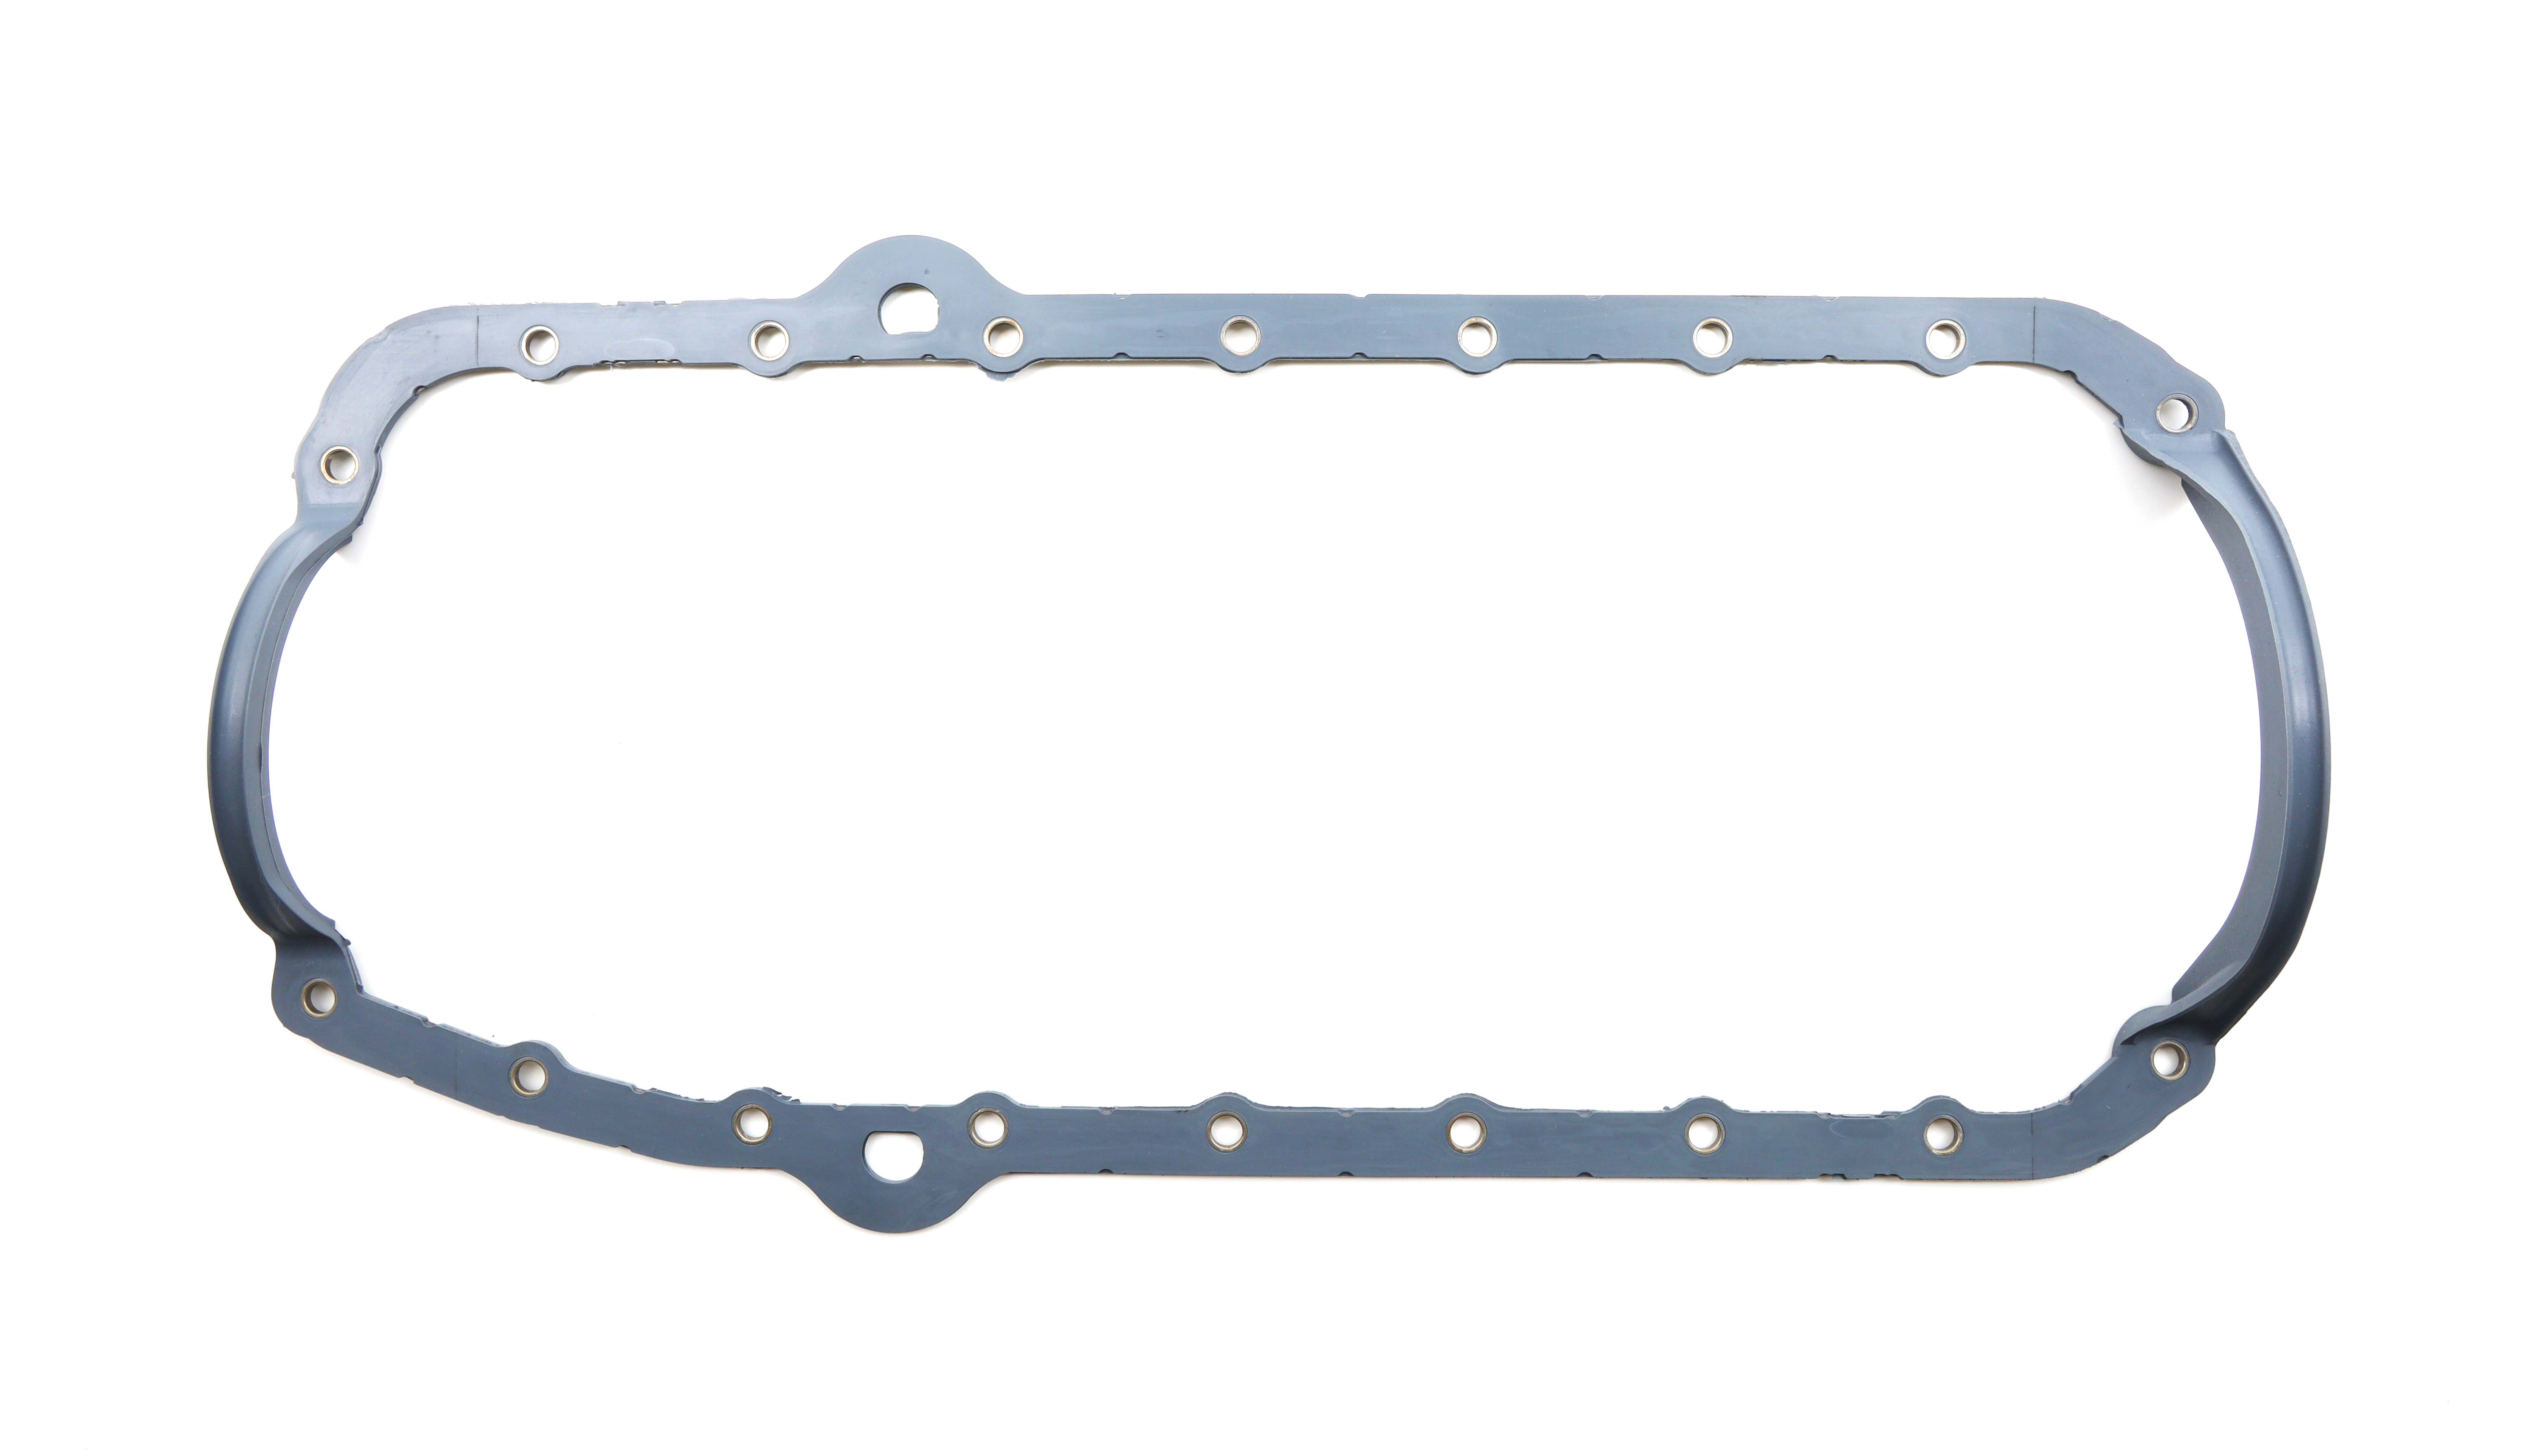 Cometic Gaskets C15546 Oil Pan Gaskets, 1-Piece, Steel Core Rubber, Small Block Chevy 1955-85, Each